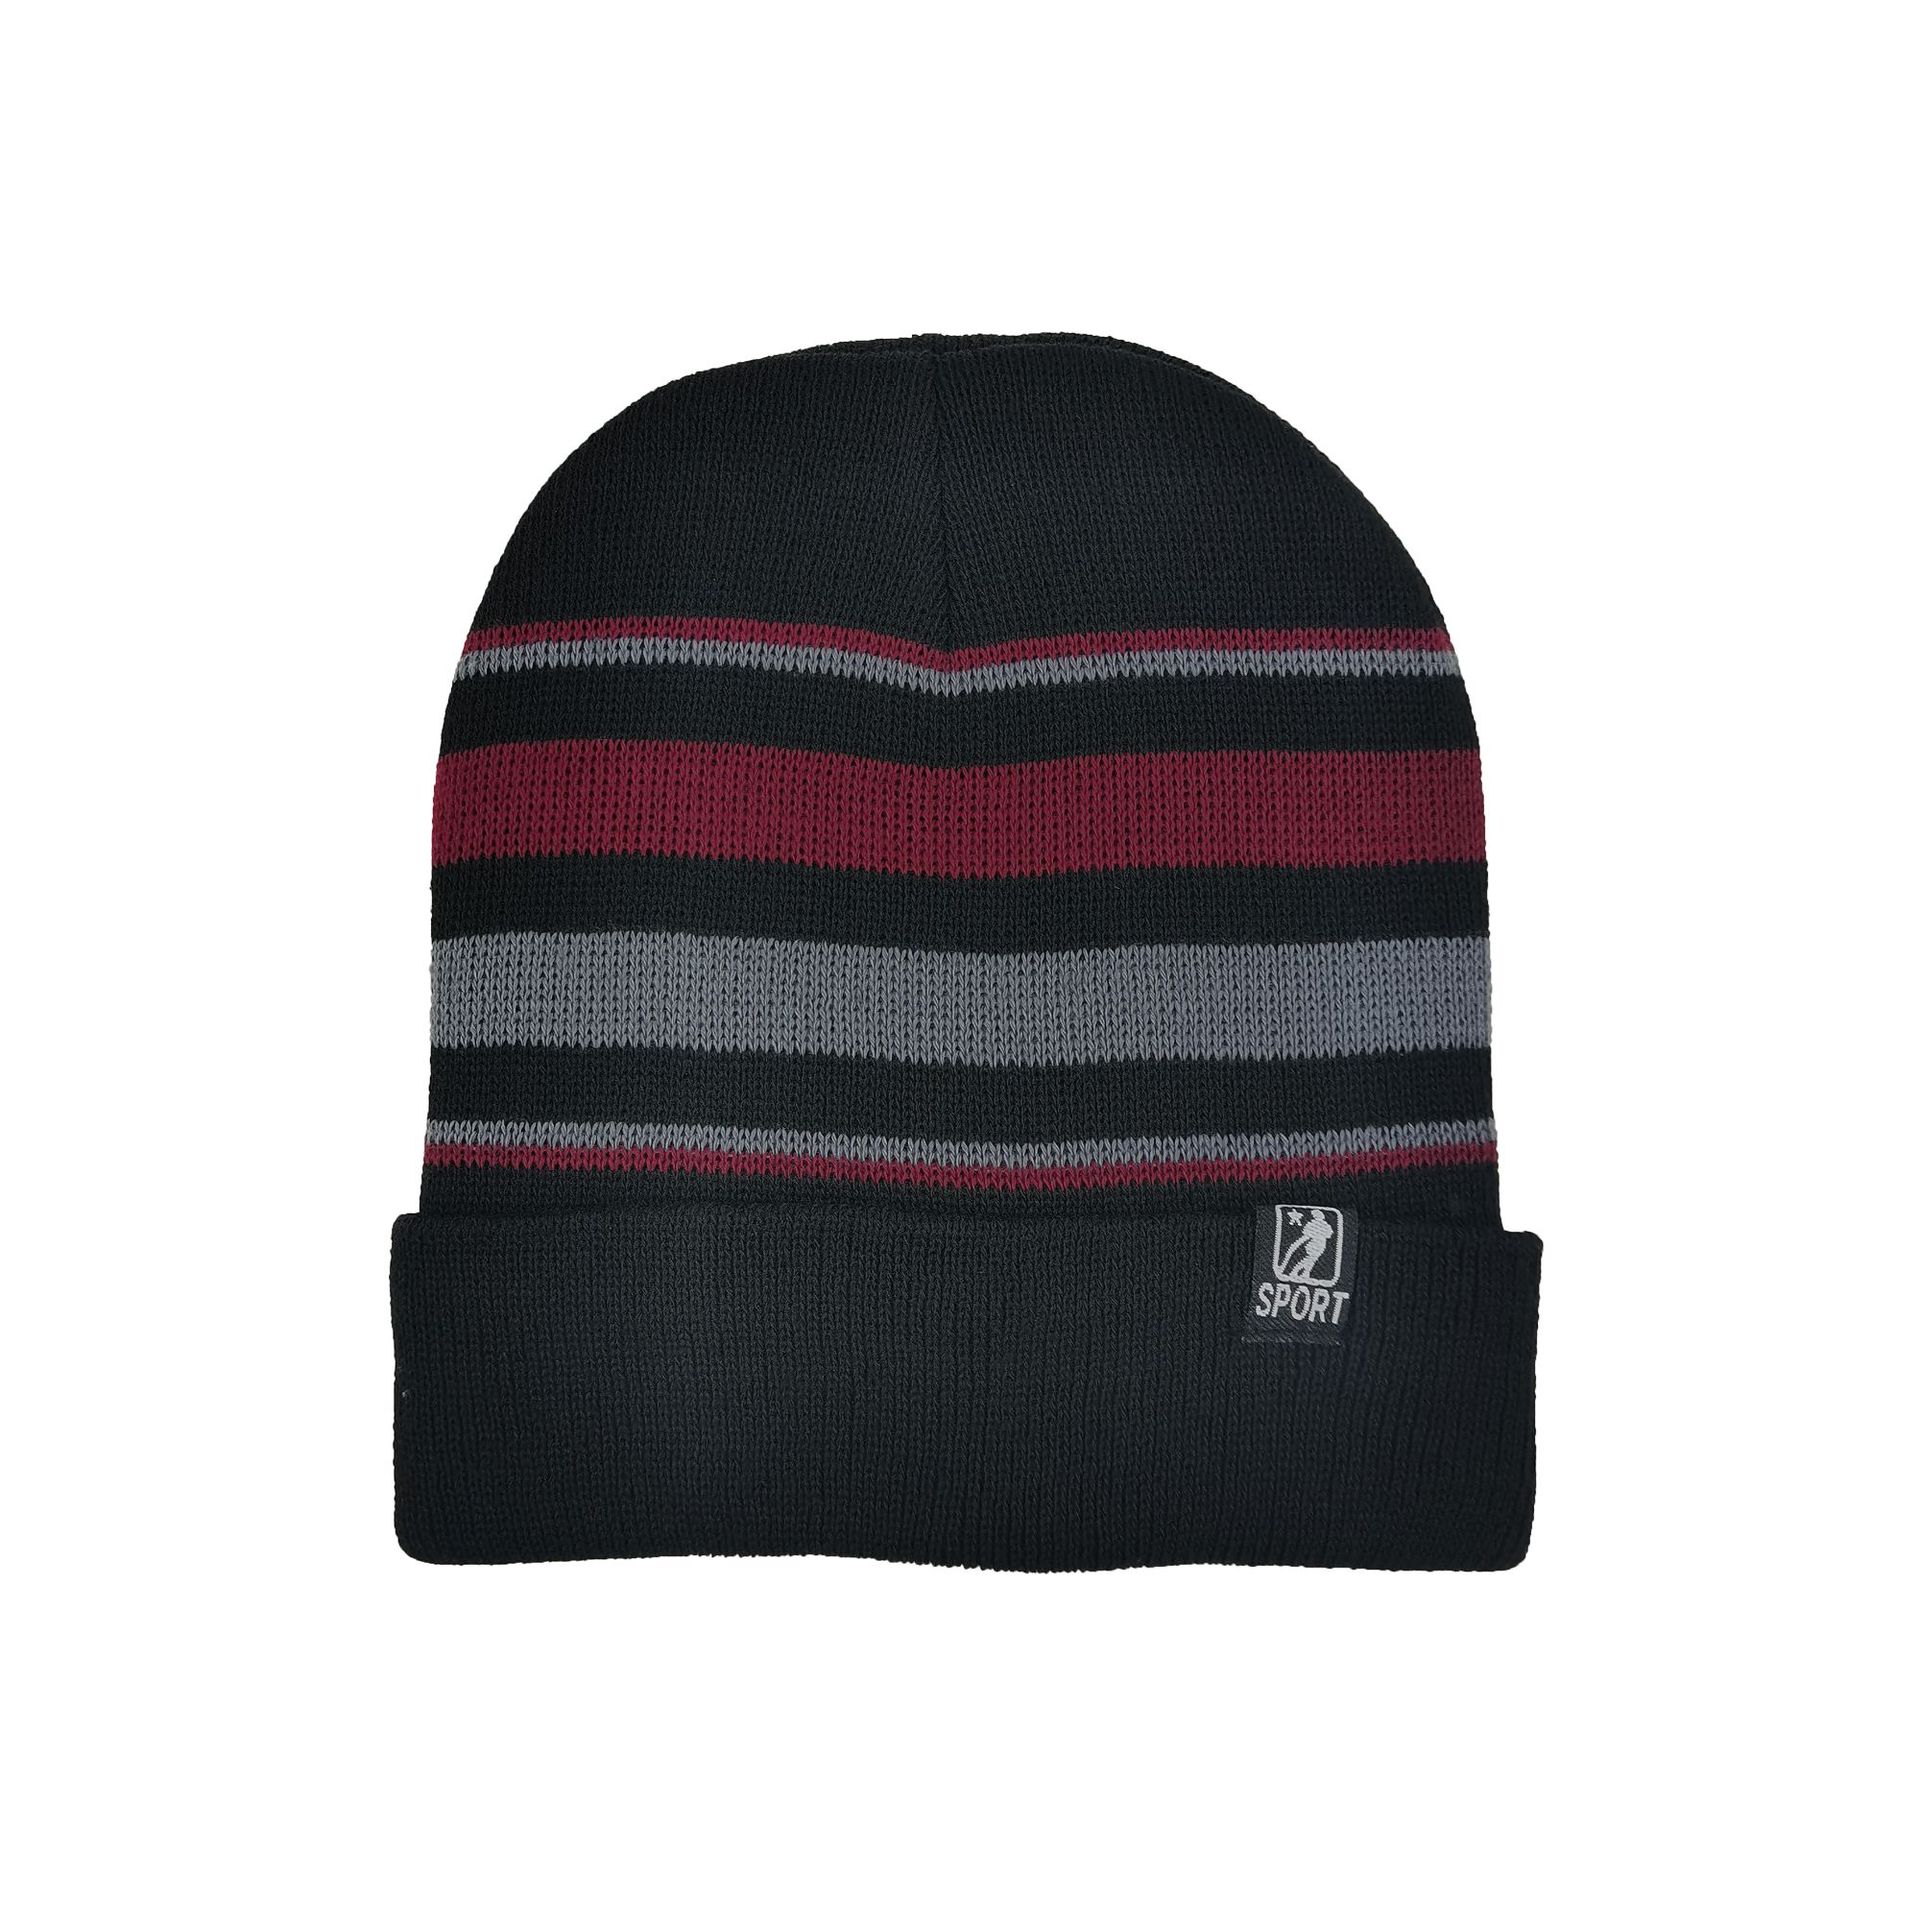 Autumn and Winter New Woolen Cap Lines Knitted Hat Fashionable Warm Thick Windproof Ice Cap Men's Ski Cap